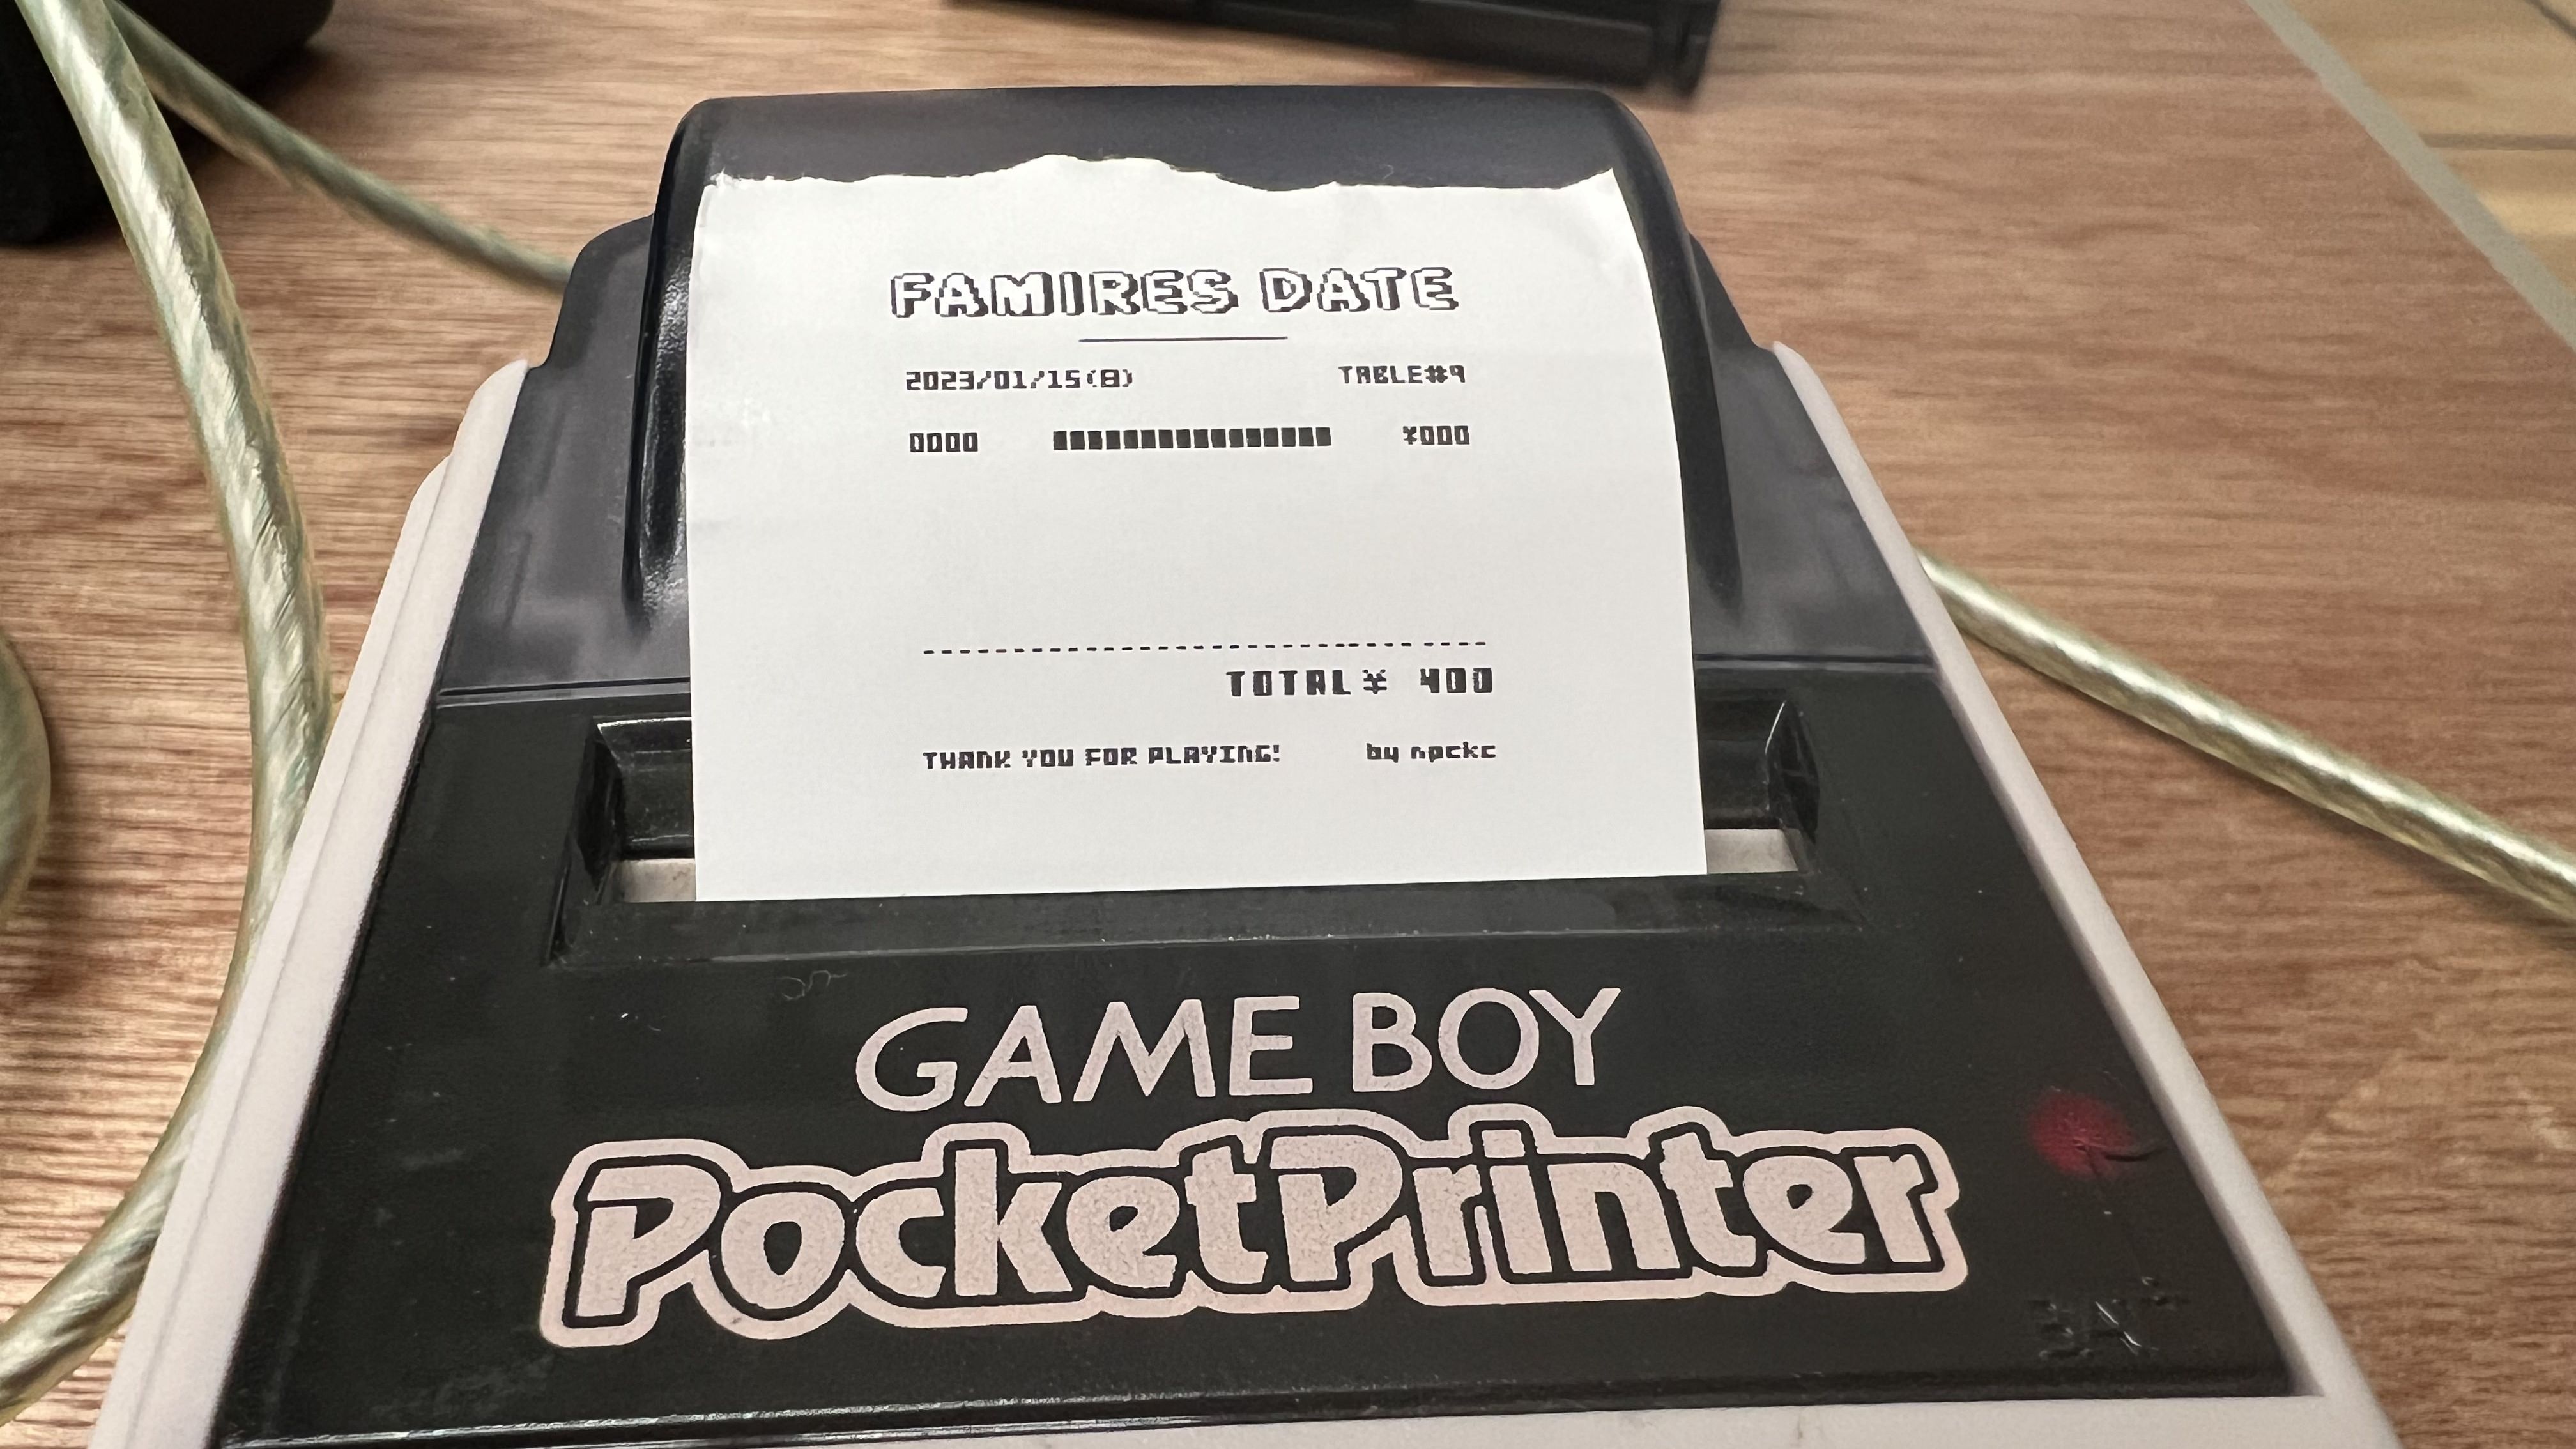 A receipt from a date in PC doujin game Famires Date, printing on a Game Boy PocketPrinter, shown at Tokyo Game Dungeon